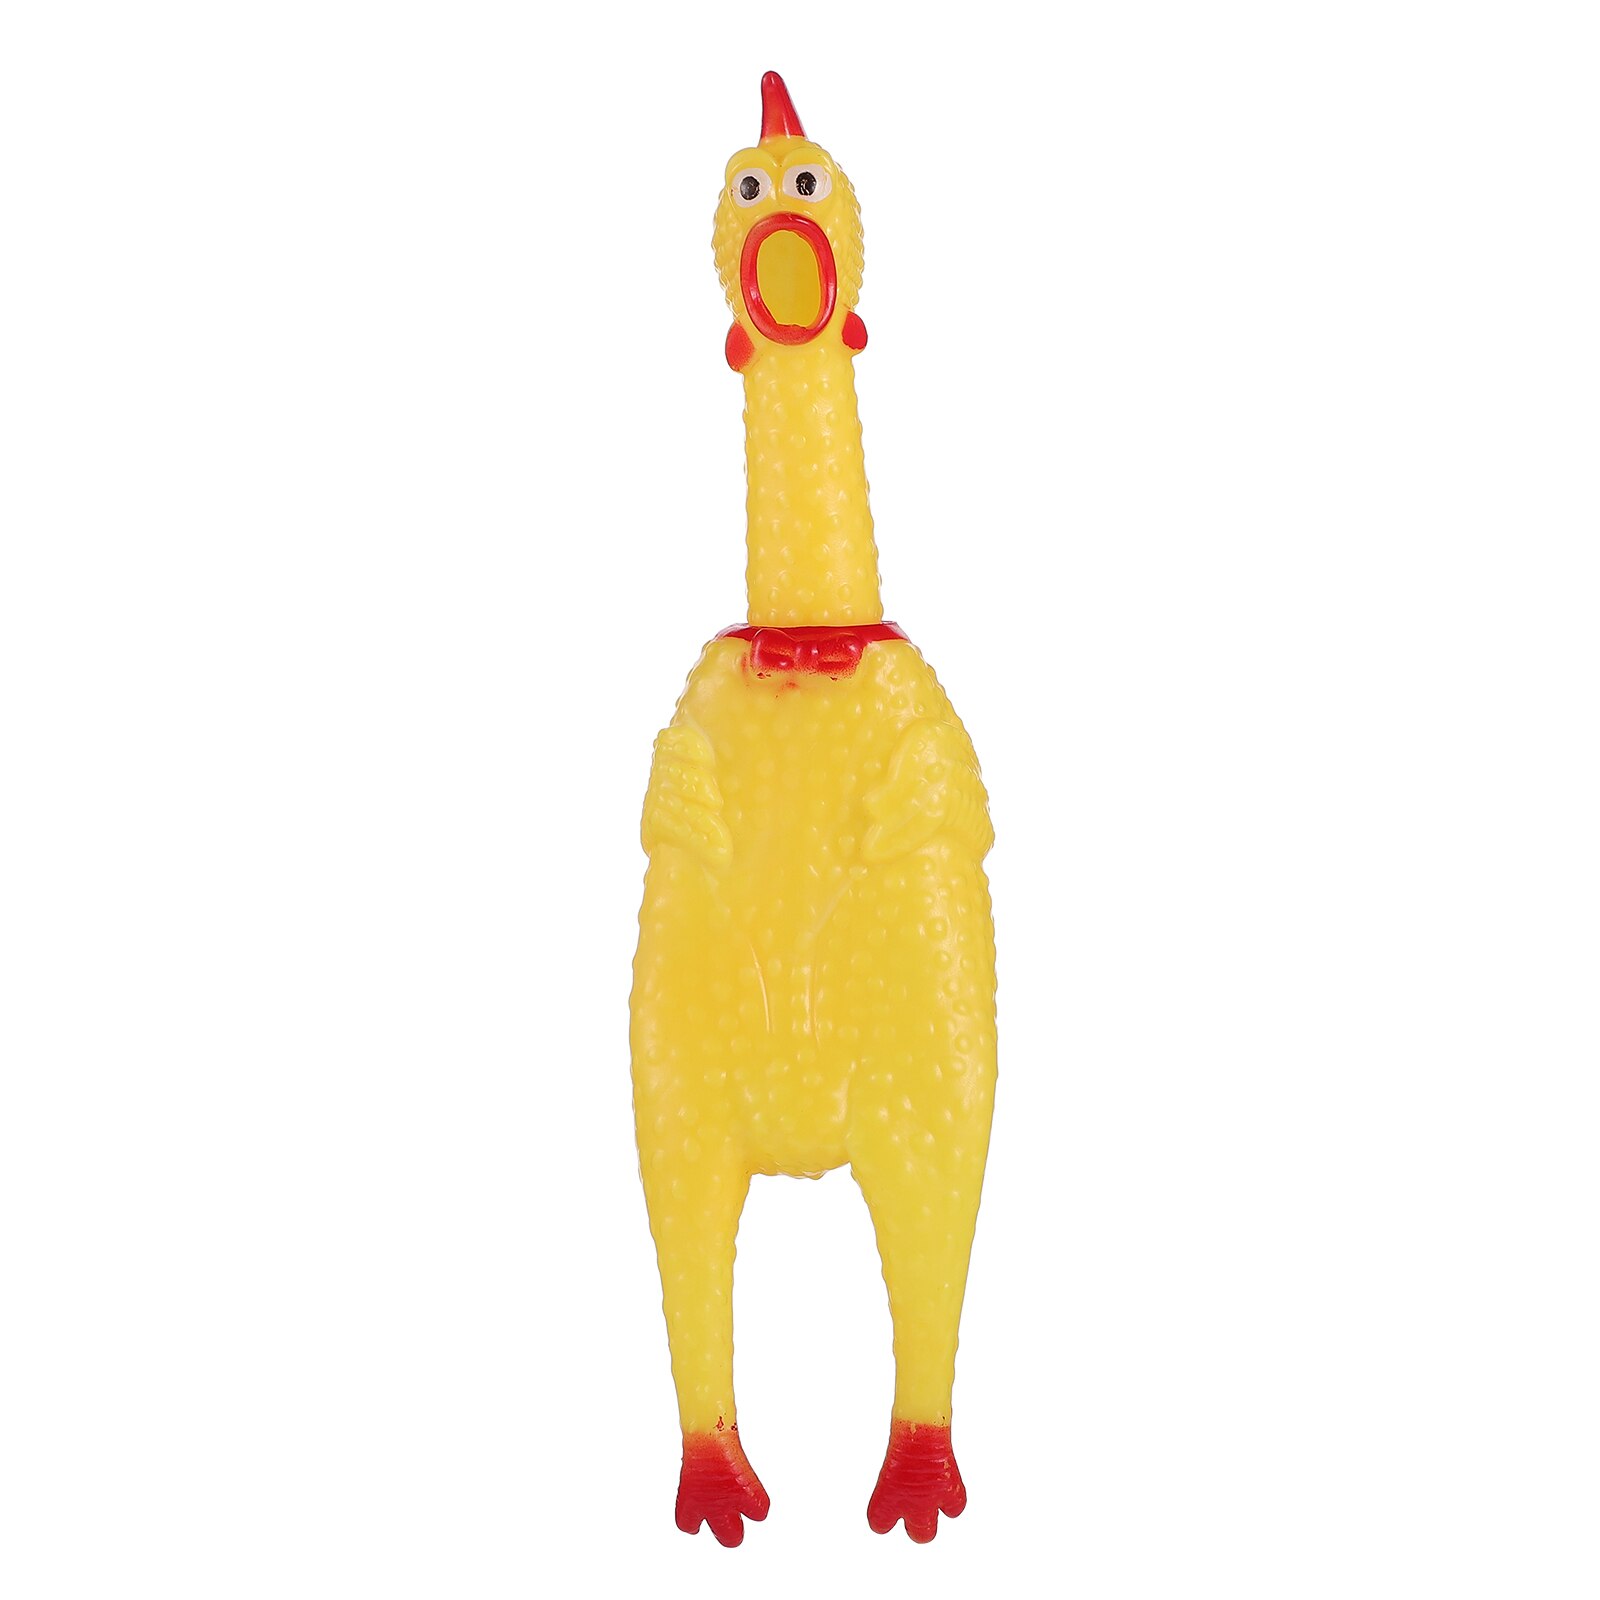 1 Pc Squeeze Chicken Safe Squeeze Prank Novelty for Pets Children